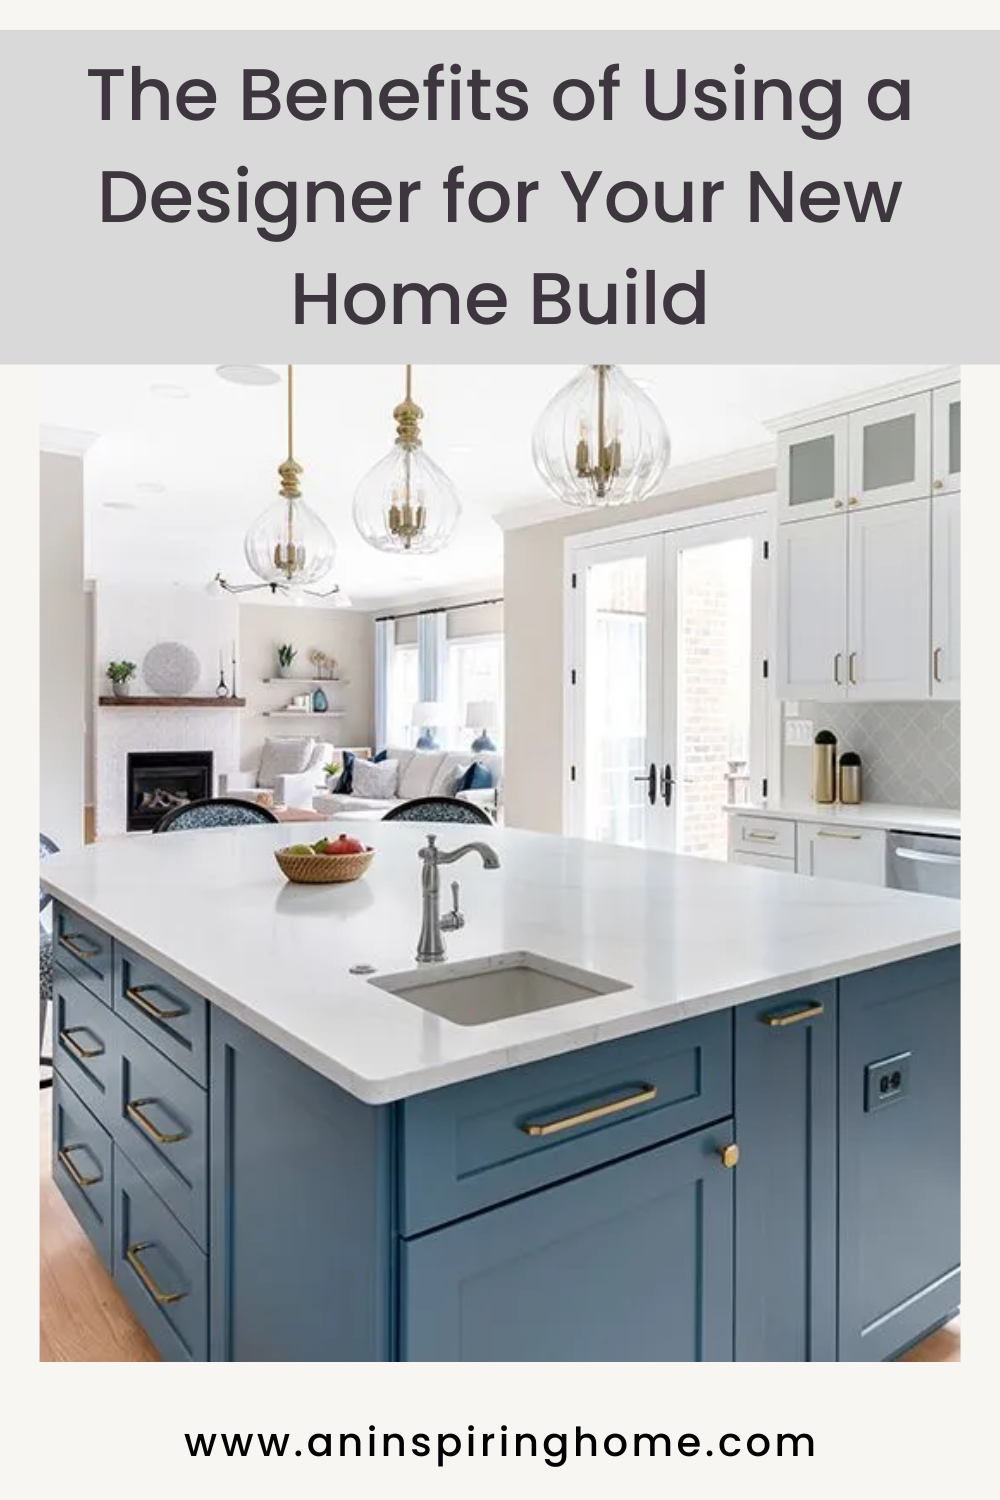 The Benefits of Using a Designer for Your New Home Build